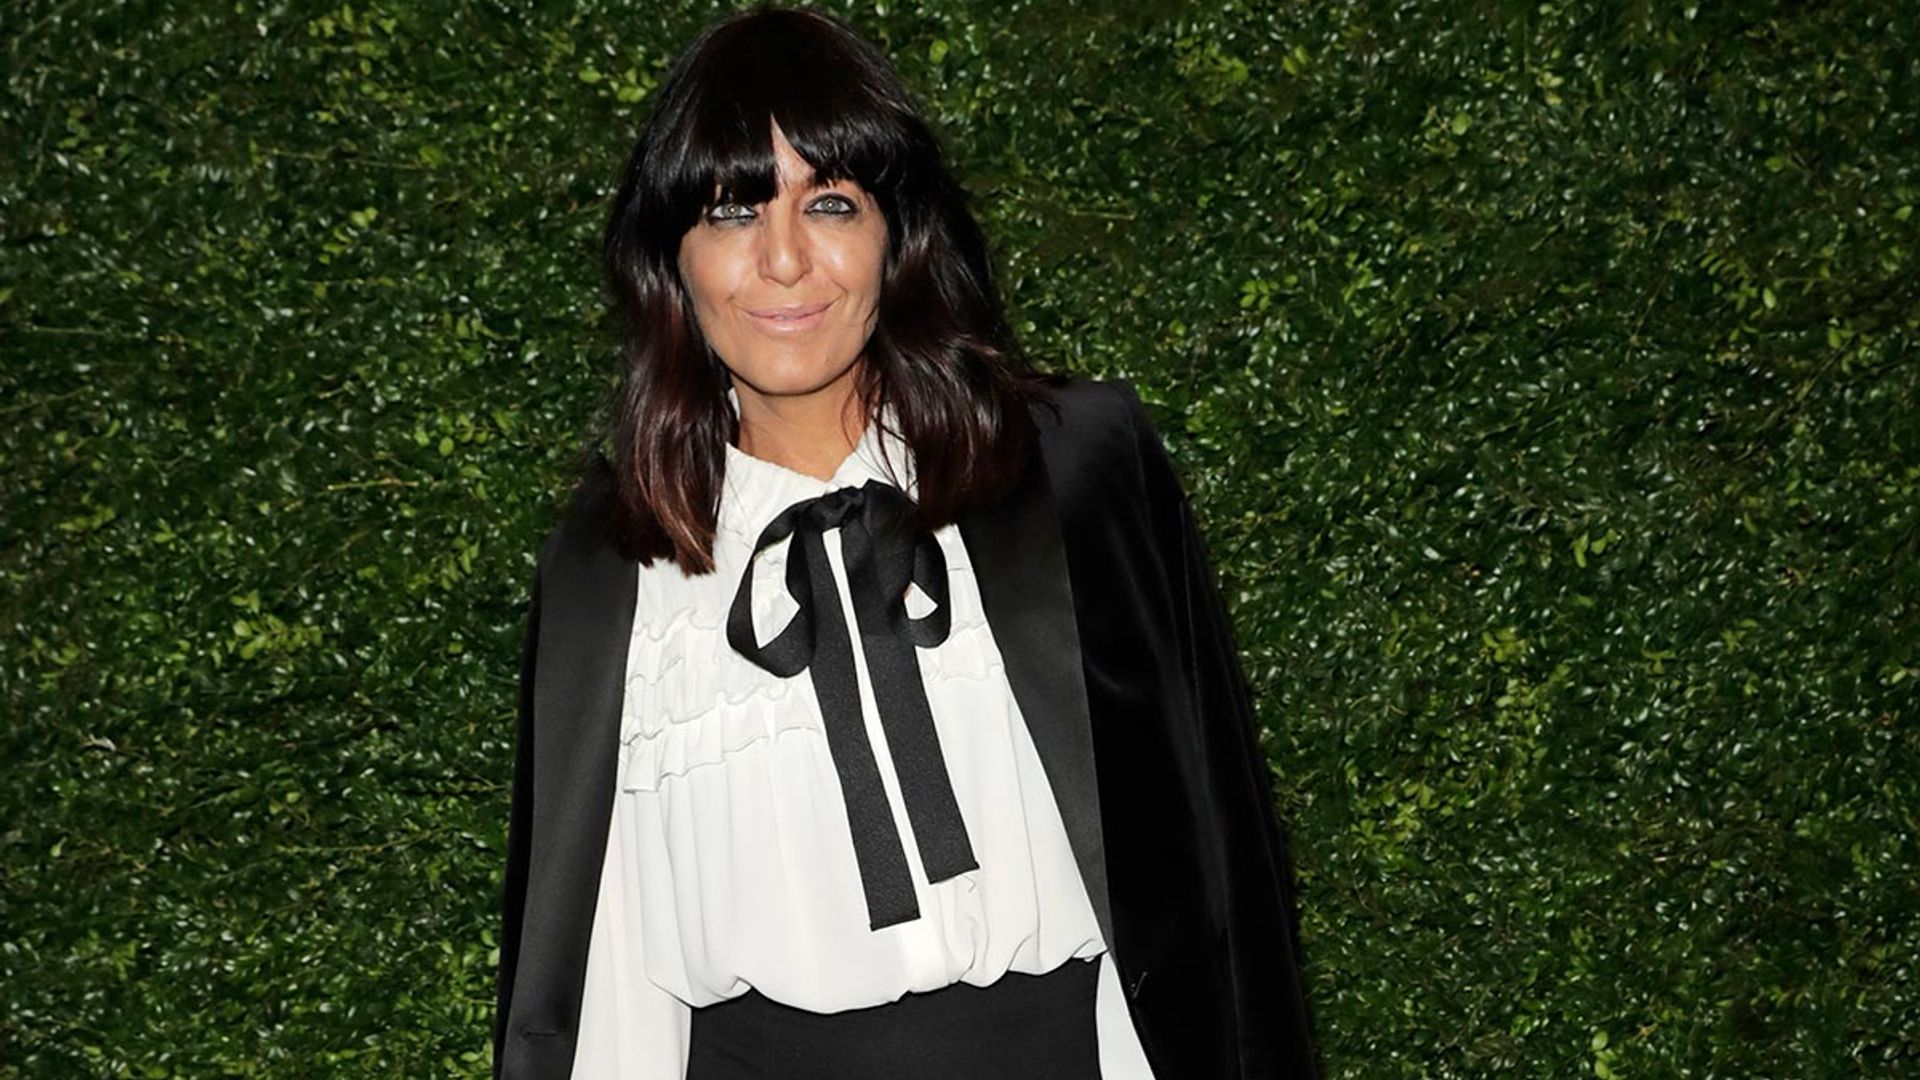 Claudia Winkleman's latest Strictly look is certainly unexpected